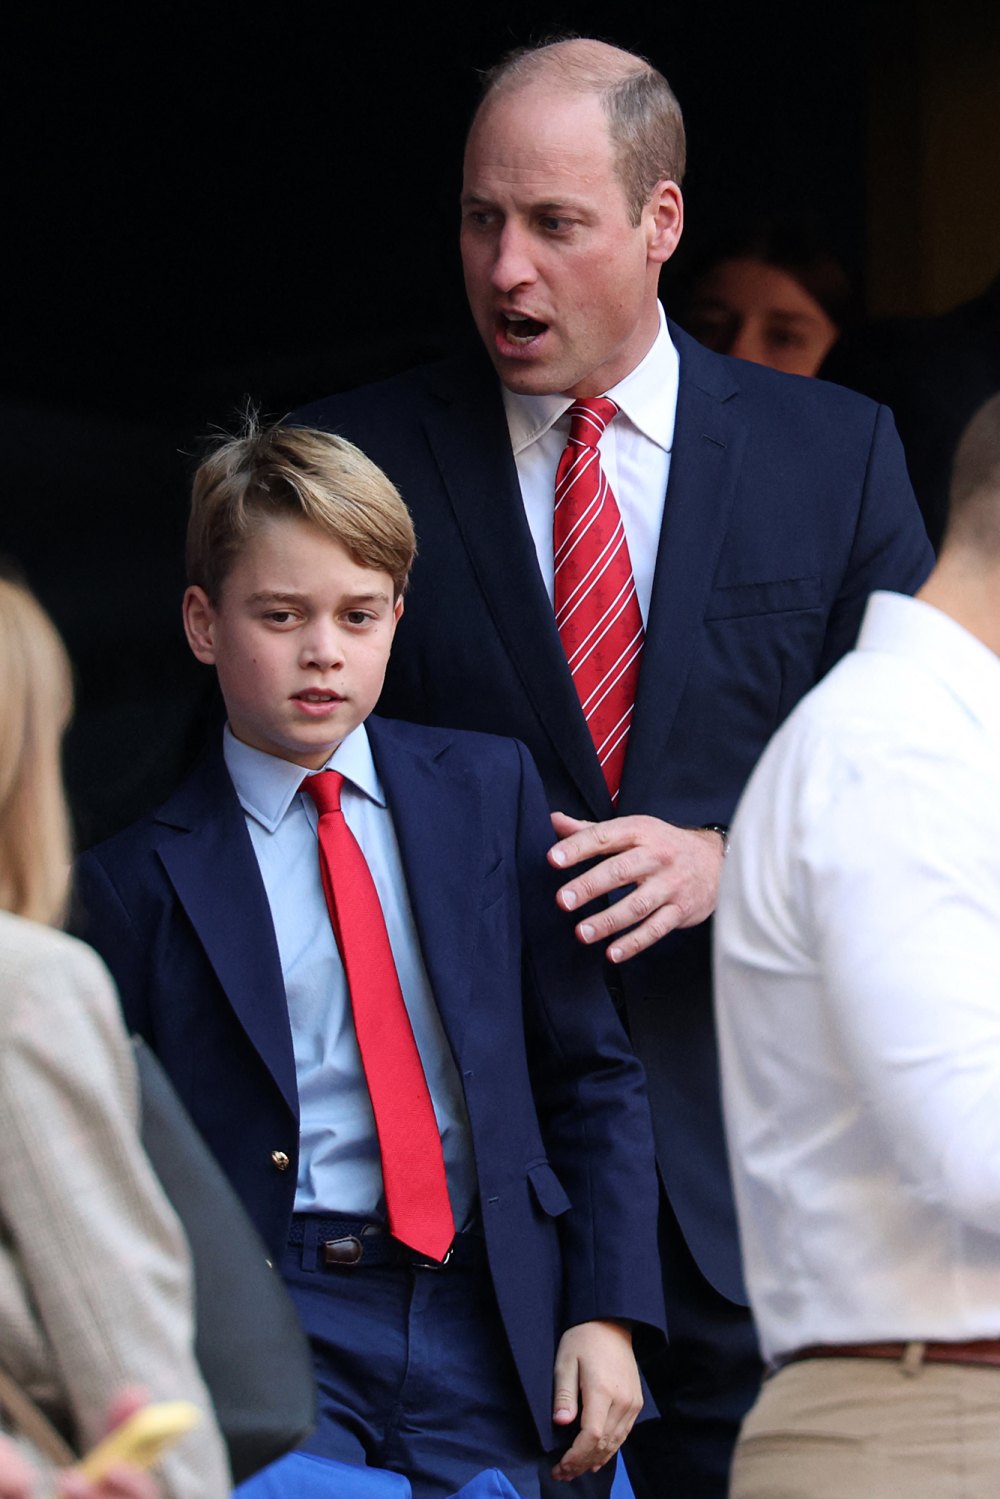 Prince William and Prince George Are Twinning in Red Ties at Rugby World Cup